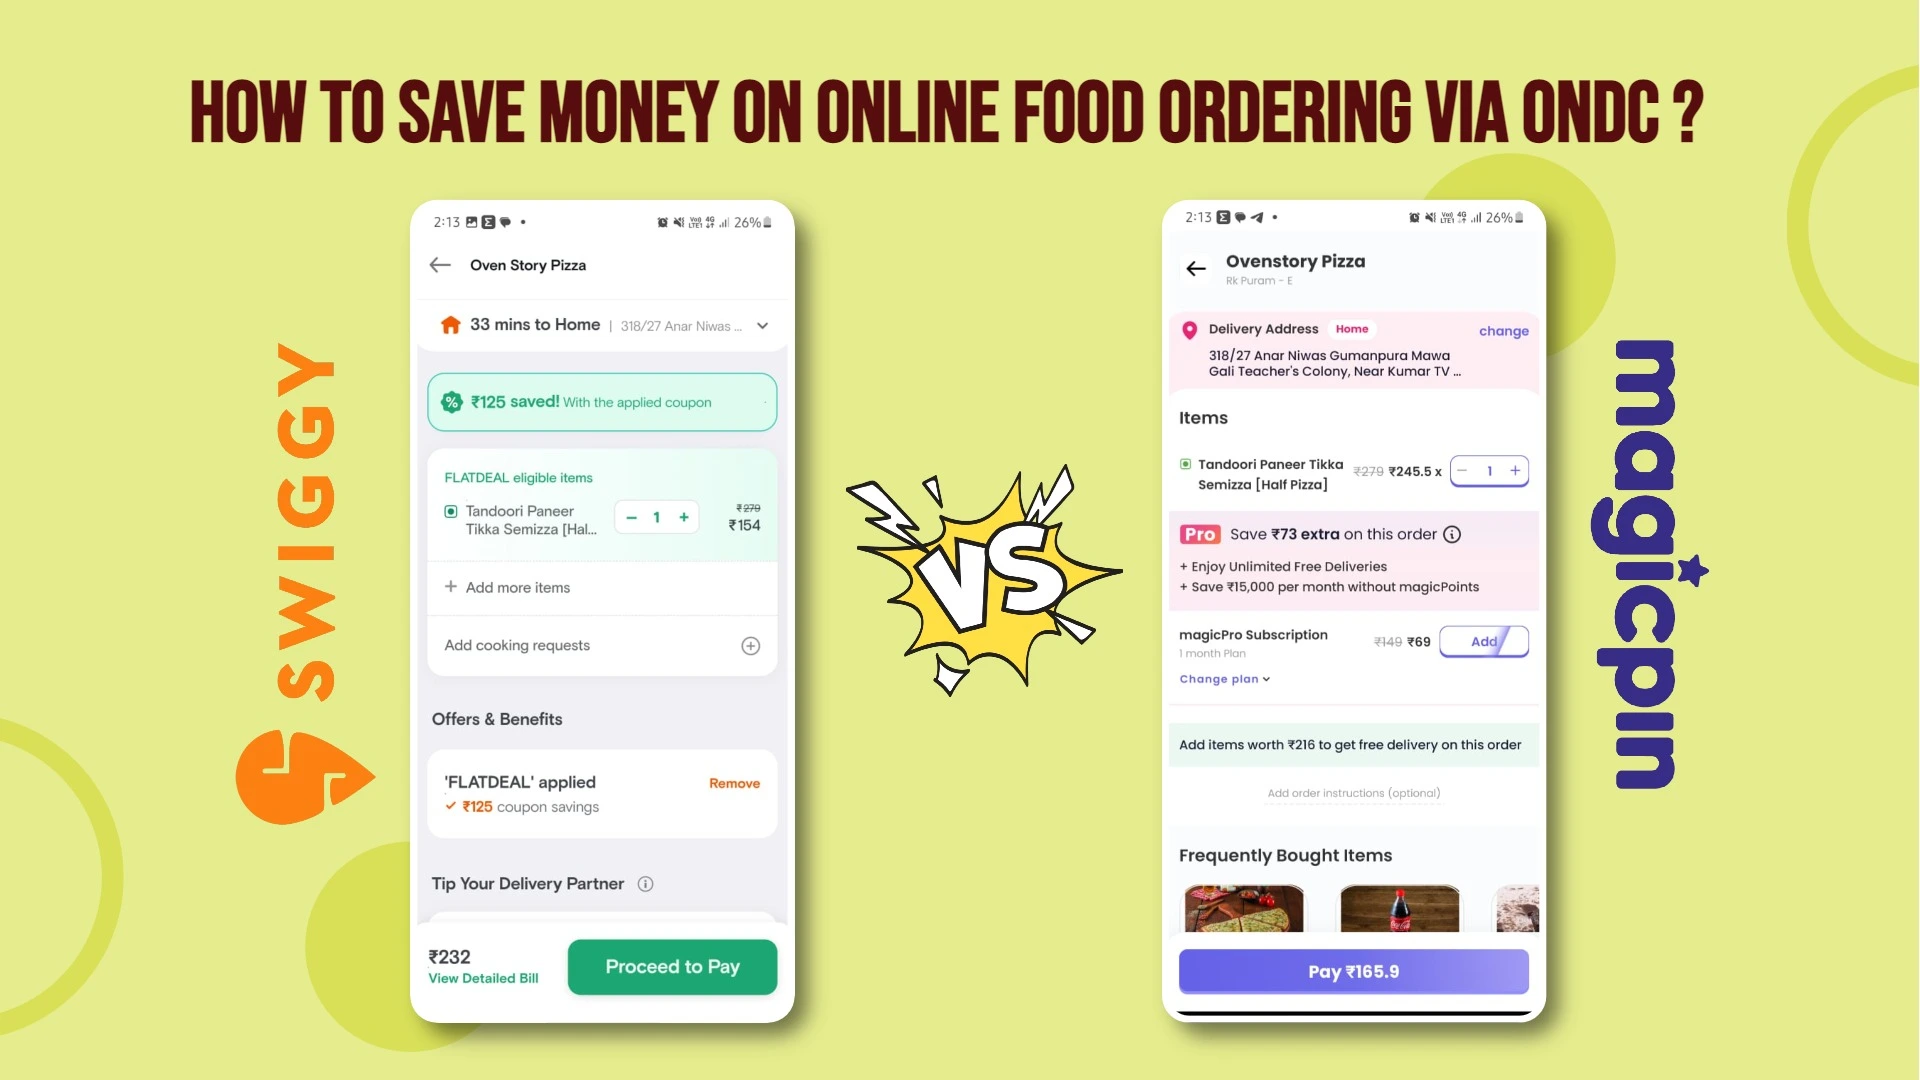 how to save money on Online Food delivery?